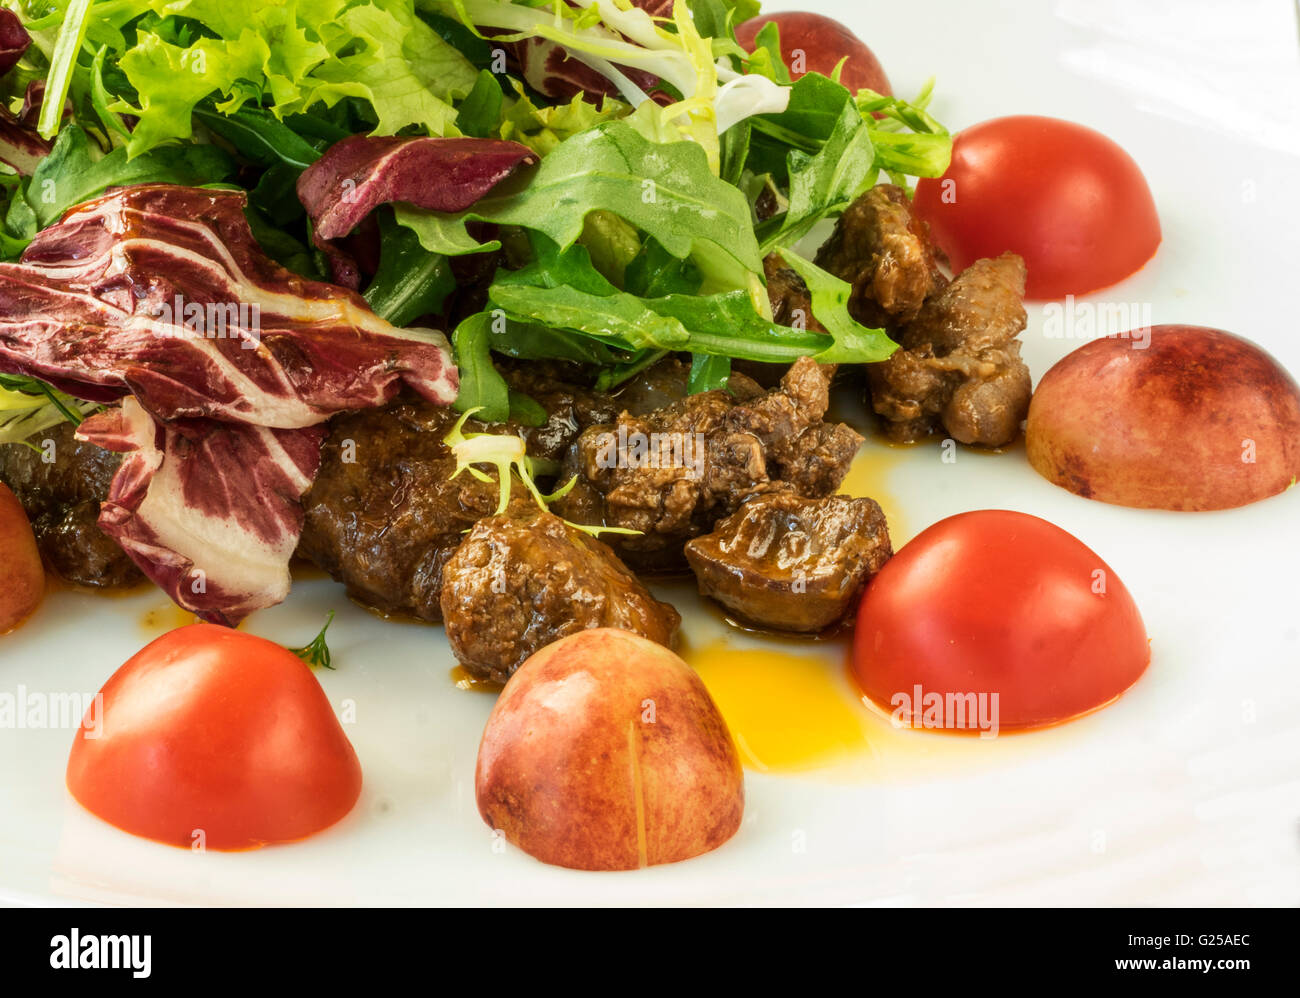 Veal and chicken liver salad Stock Photo